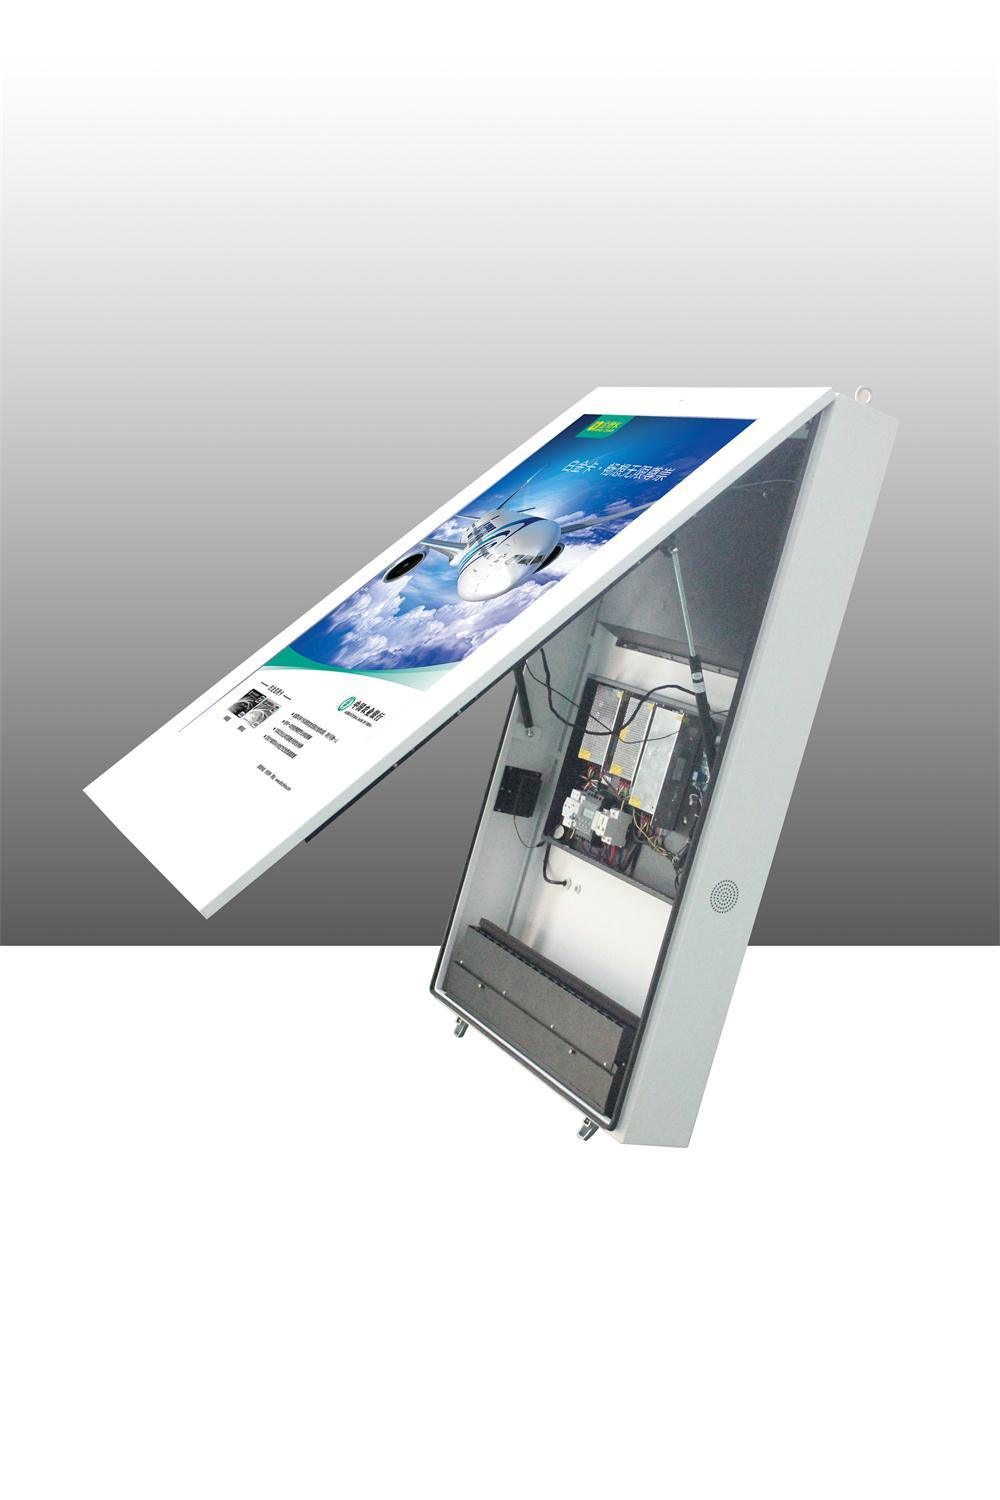 43-Inch High Brightness Wall-Mount Outdoor Advertising Display